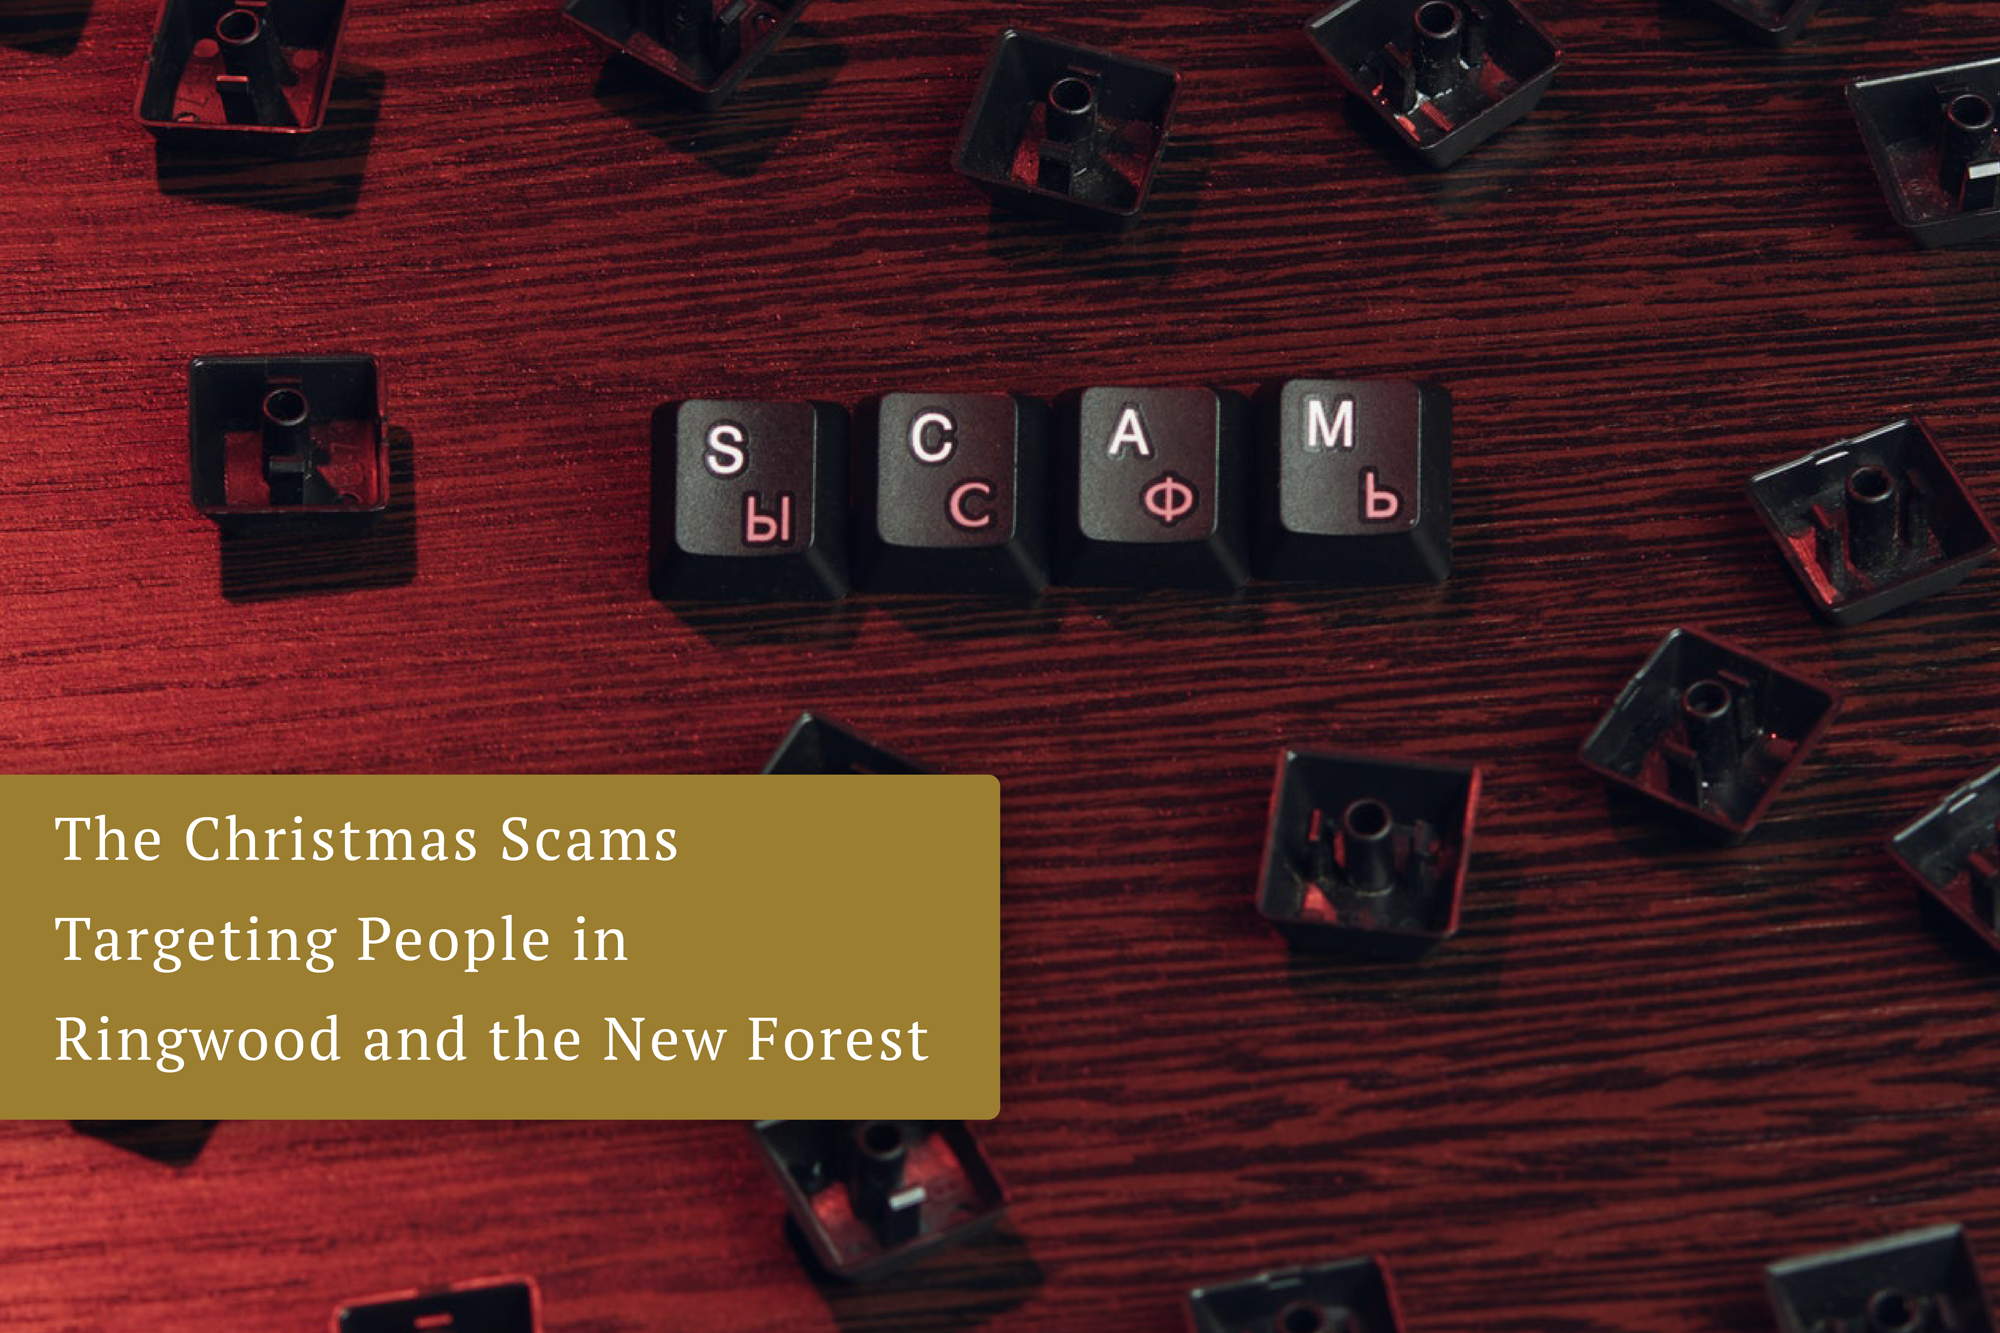 The Christmas Scams Targeting People in Ringwood and the New Forest